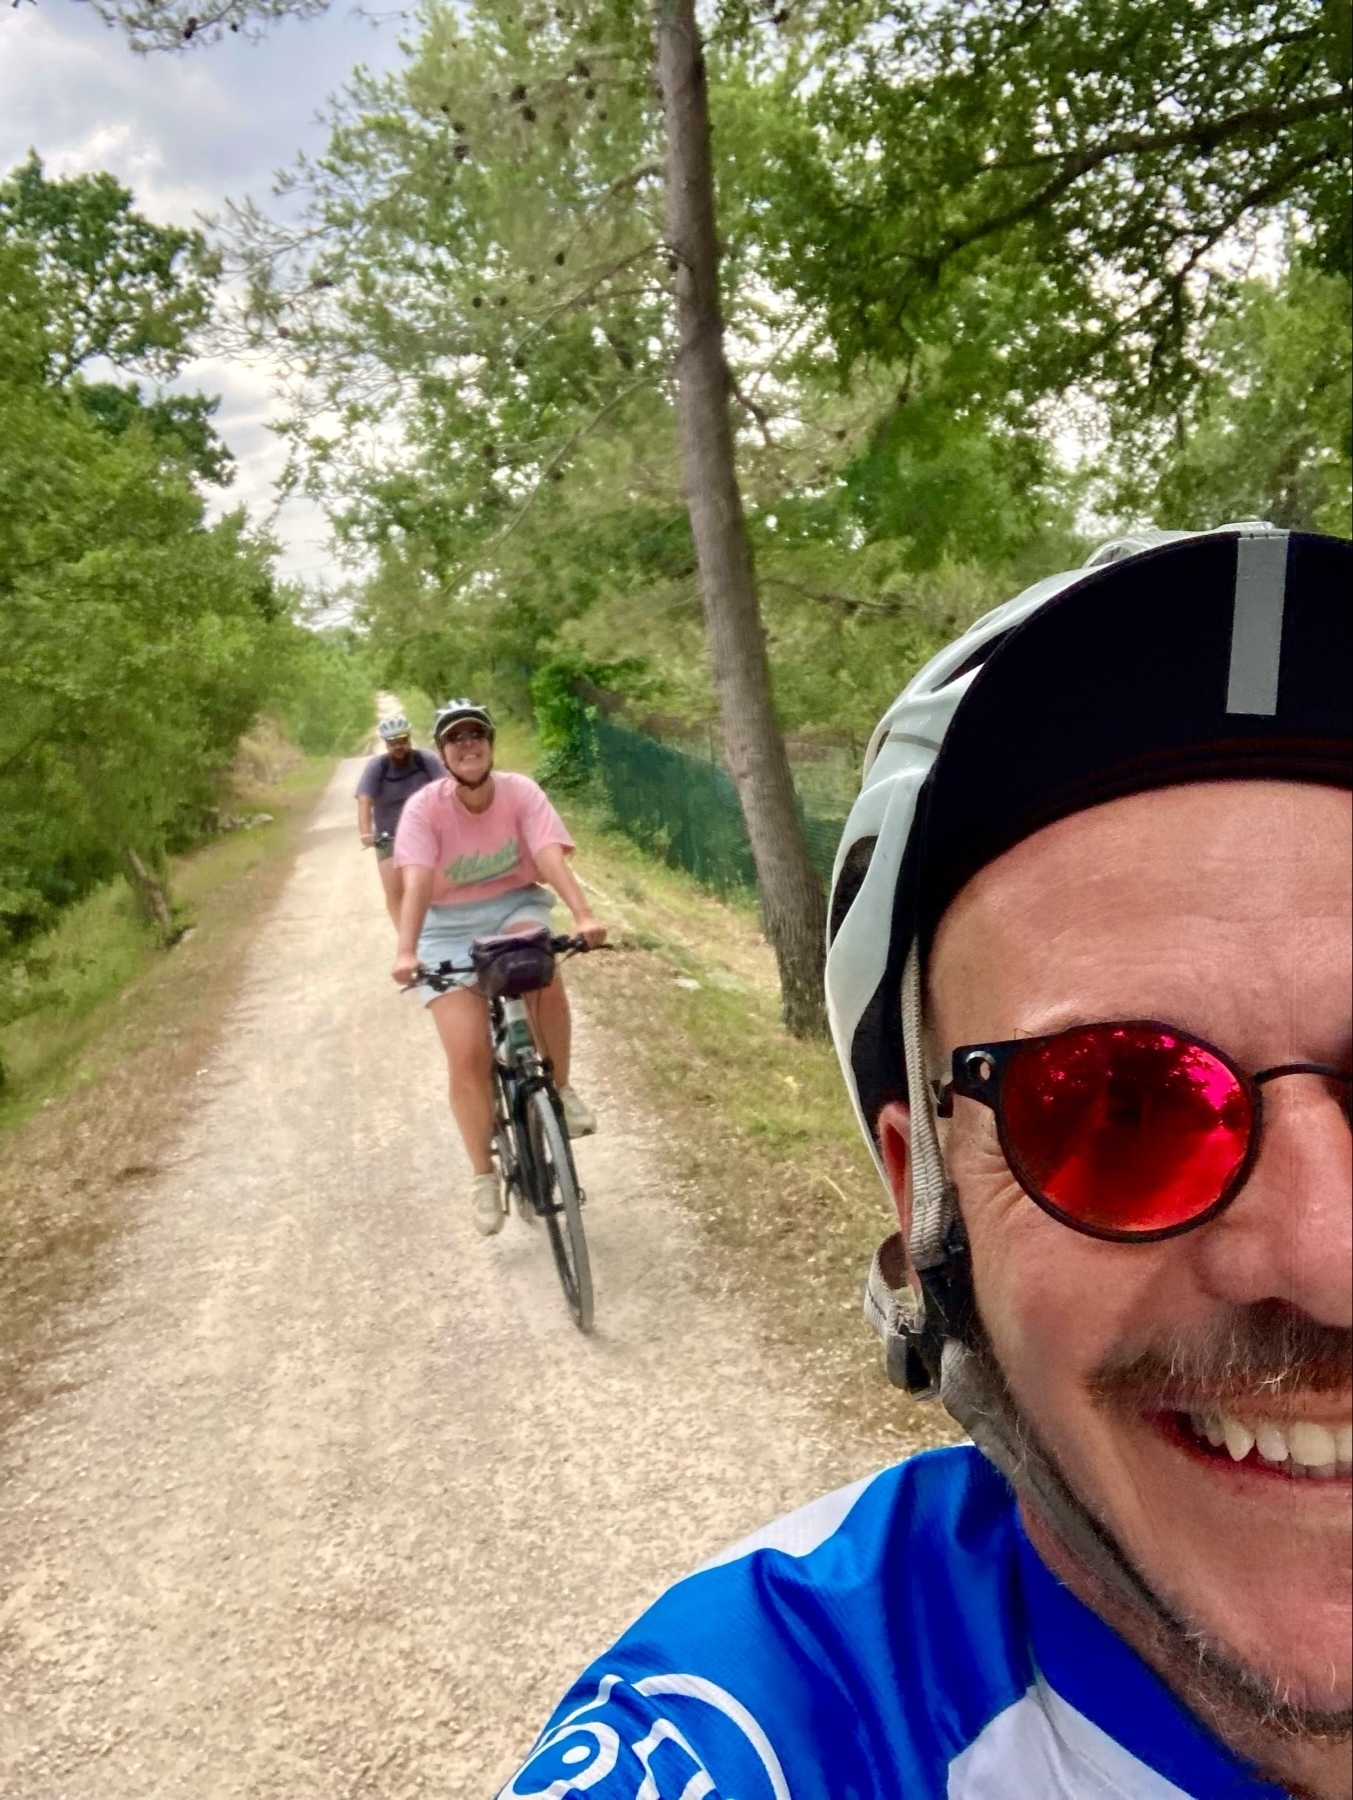 A group of three cyclists riding on a dirt trail surrounded by trees and greenery. The foreground features a smiling cyclist in a blue and white jersey with red-tinted sunglasses, taking a selfie. Two other cyclists can be seen in the background wearing helmets.